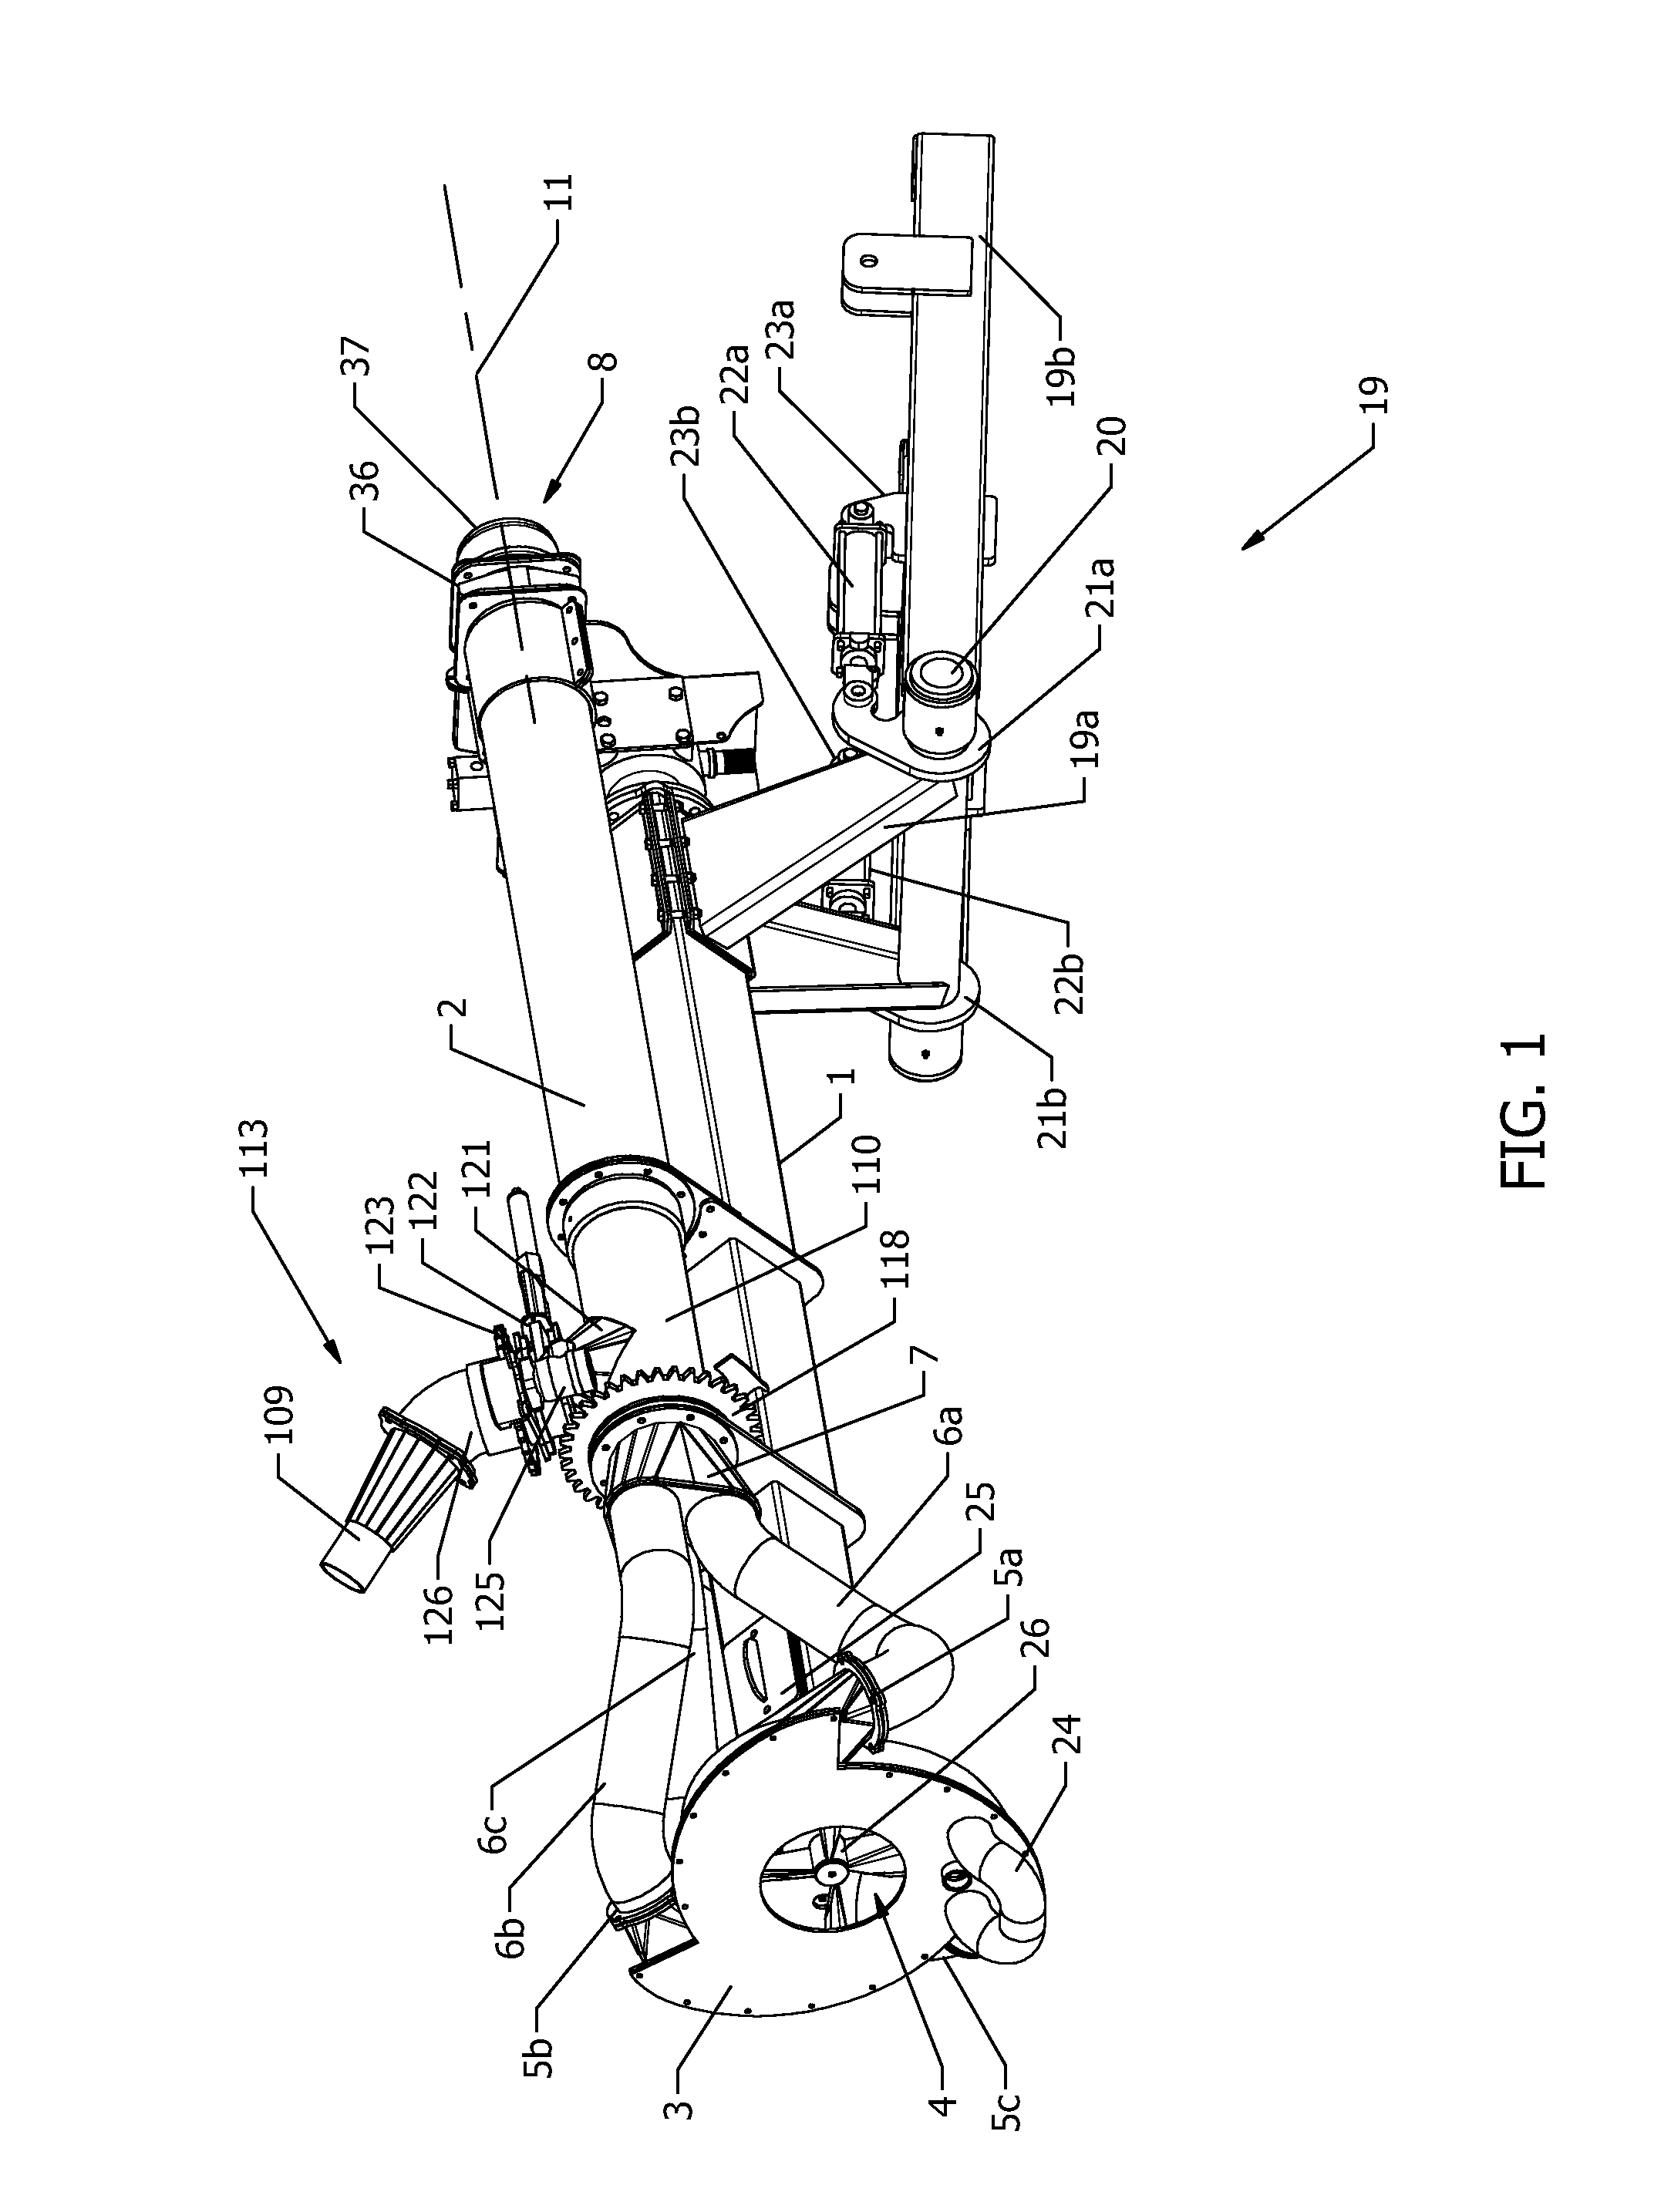 Pump for immersion within a fluid reservoir